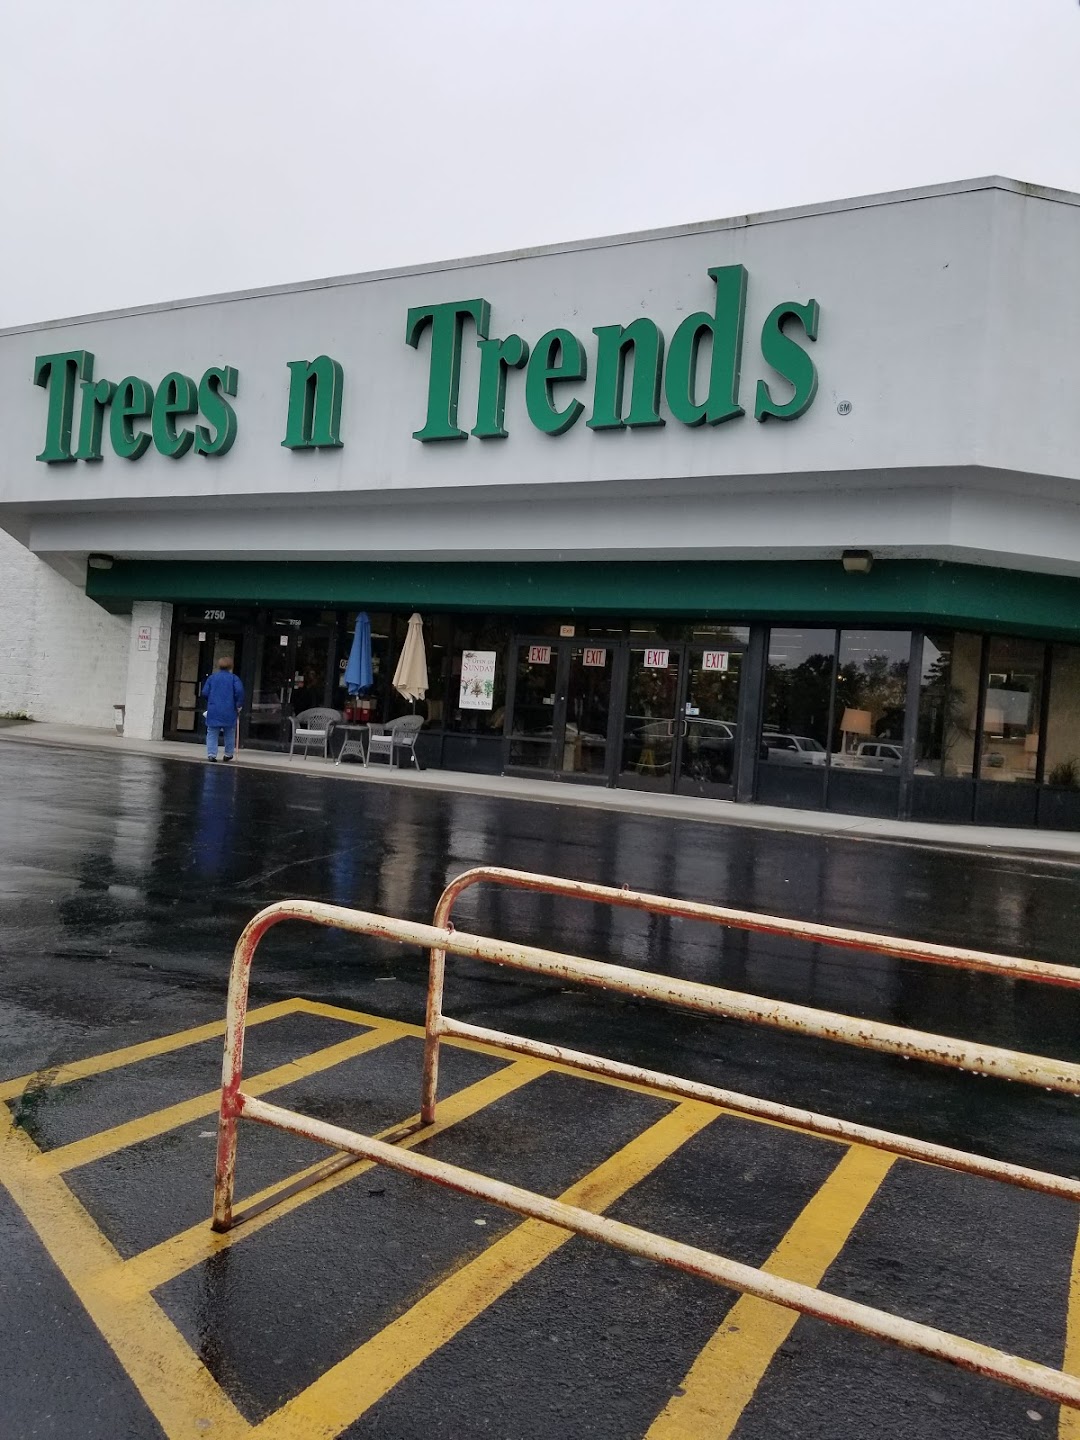 Trees n Trends - Cleveland, TN